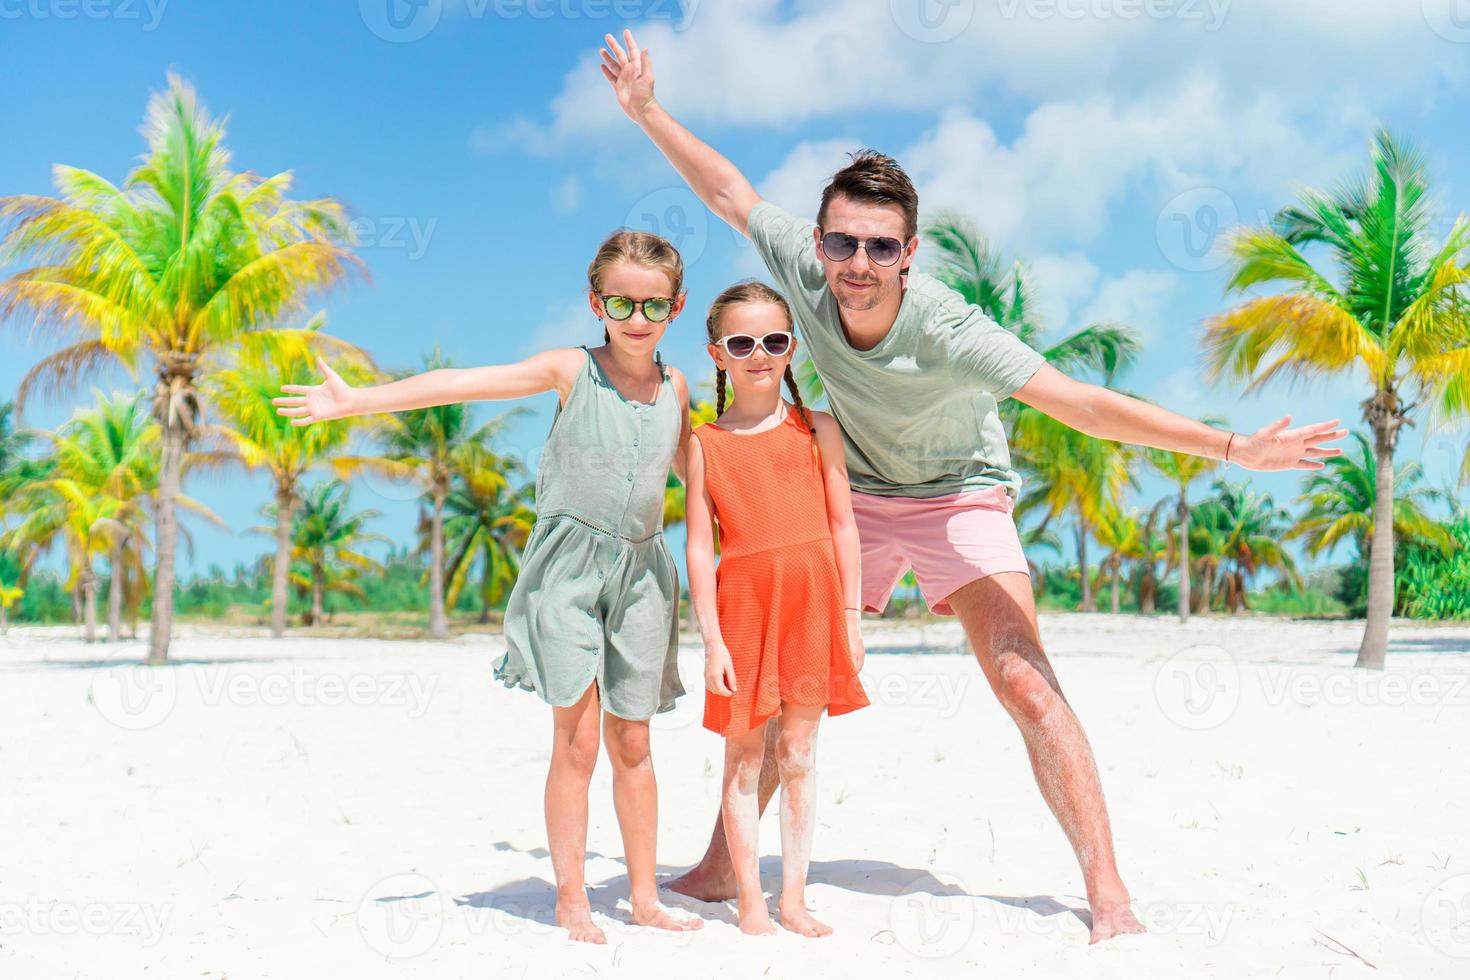 Father and kids enjoying beach summer vacation photo